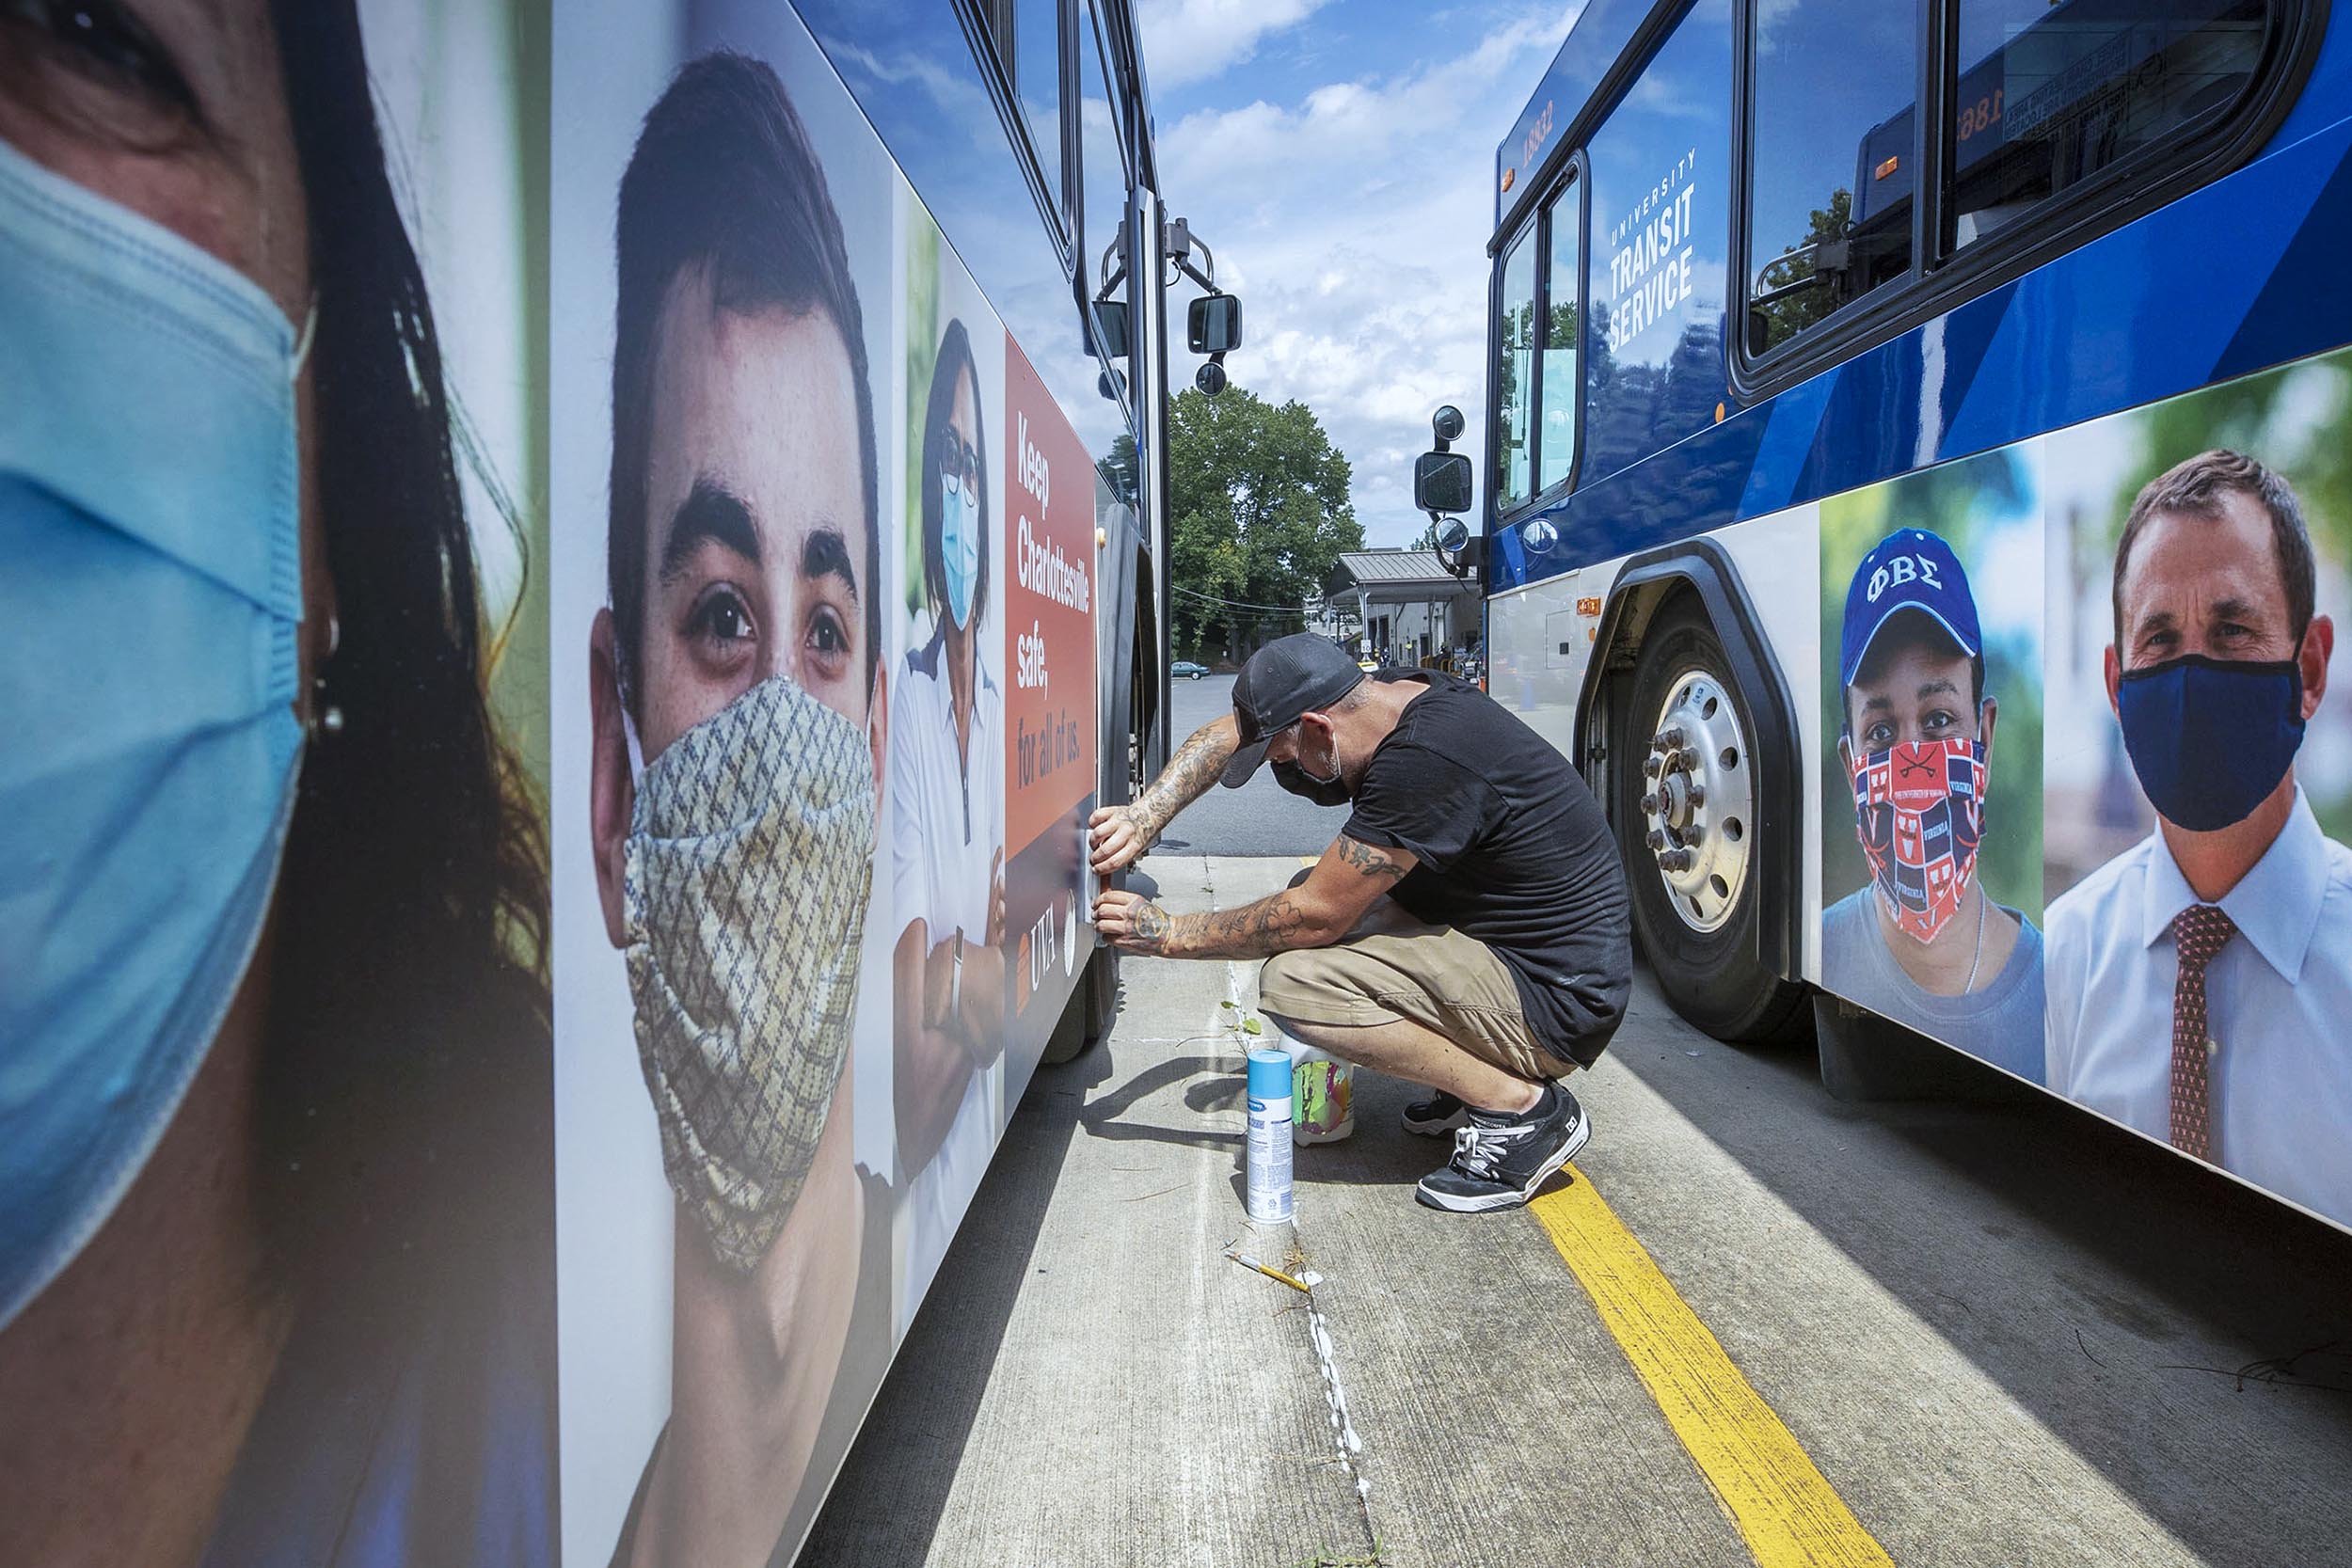 Staff member adding new signage to the outside of the UVA Transportation busses